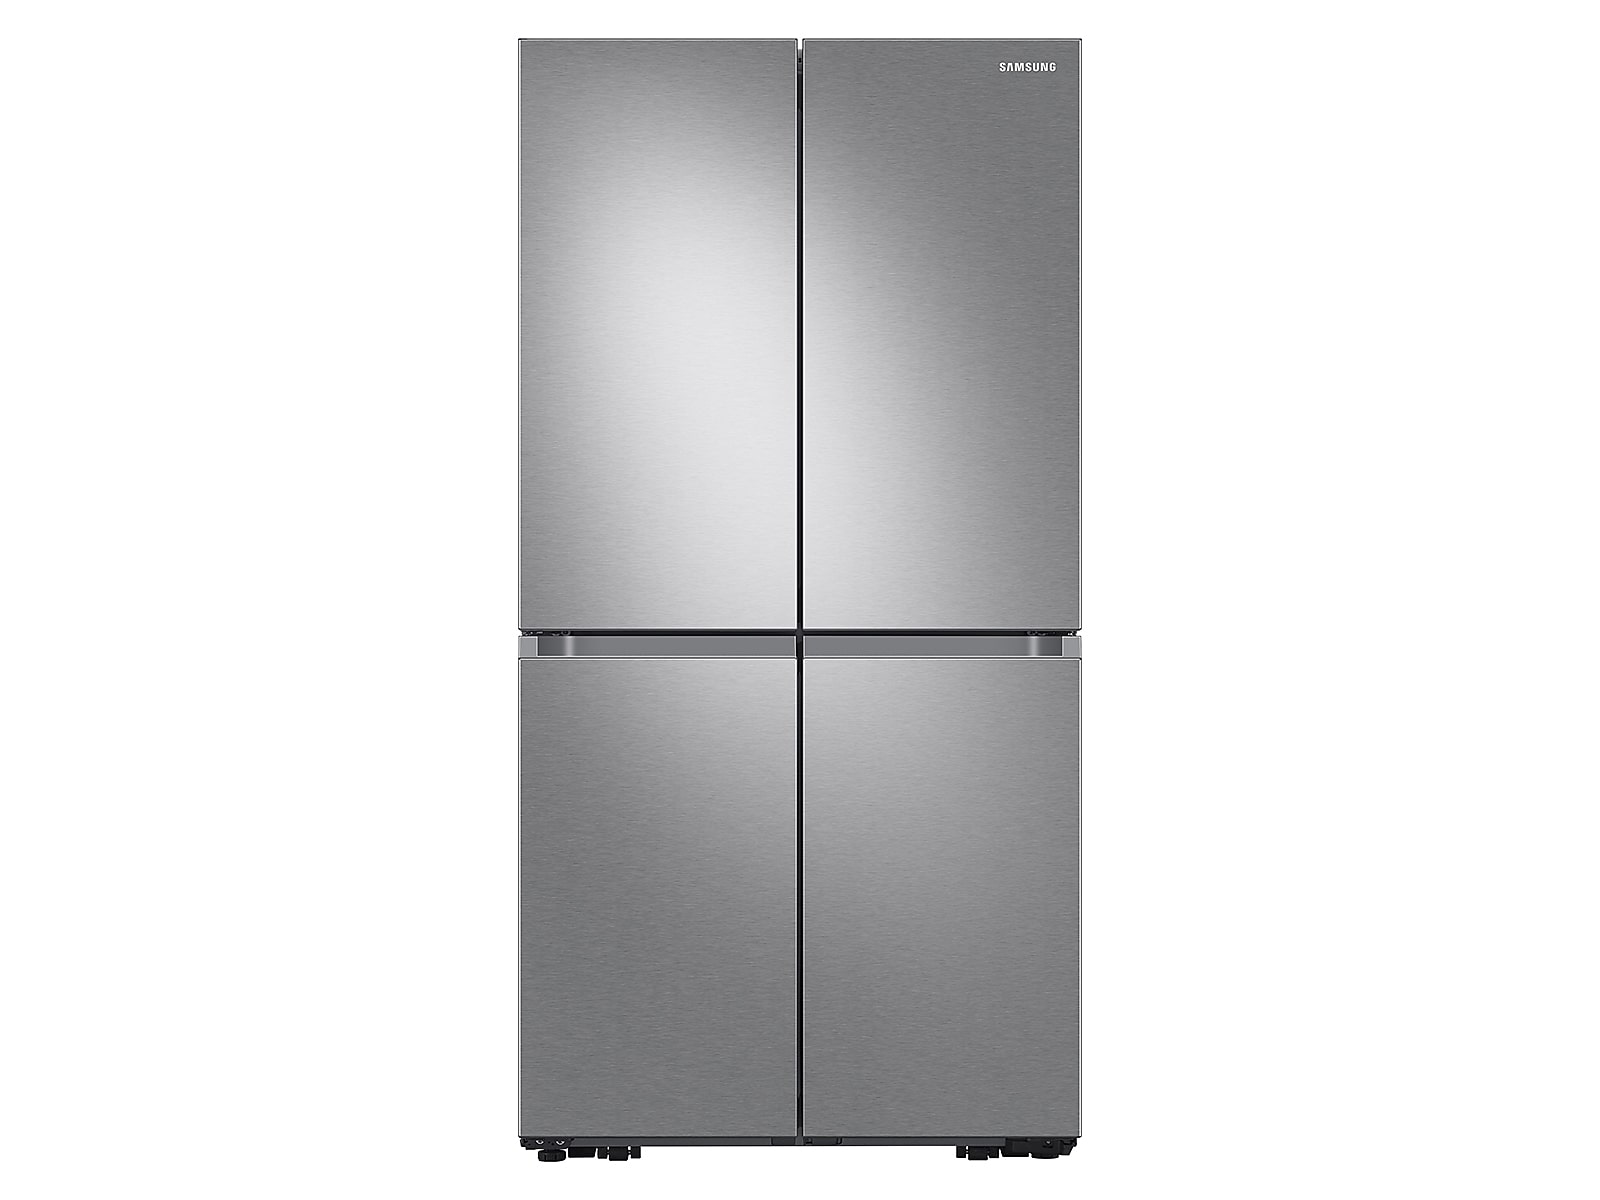 Samsung 29 cu. ft. Smart 4-Door Flex™ Refrigerator with AutoFill Water Pitcher and Dual Ice Maker in Stainless Steel(RF29A9071SR/AA)